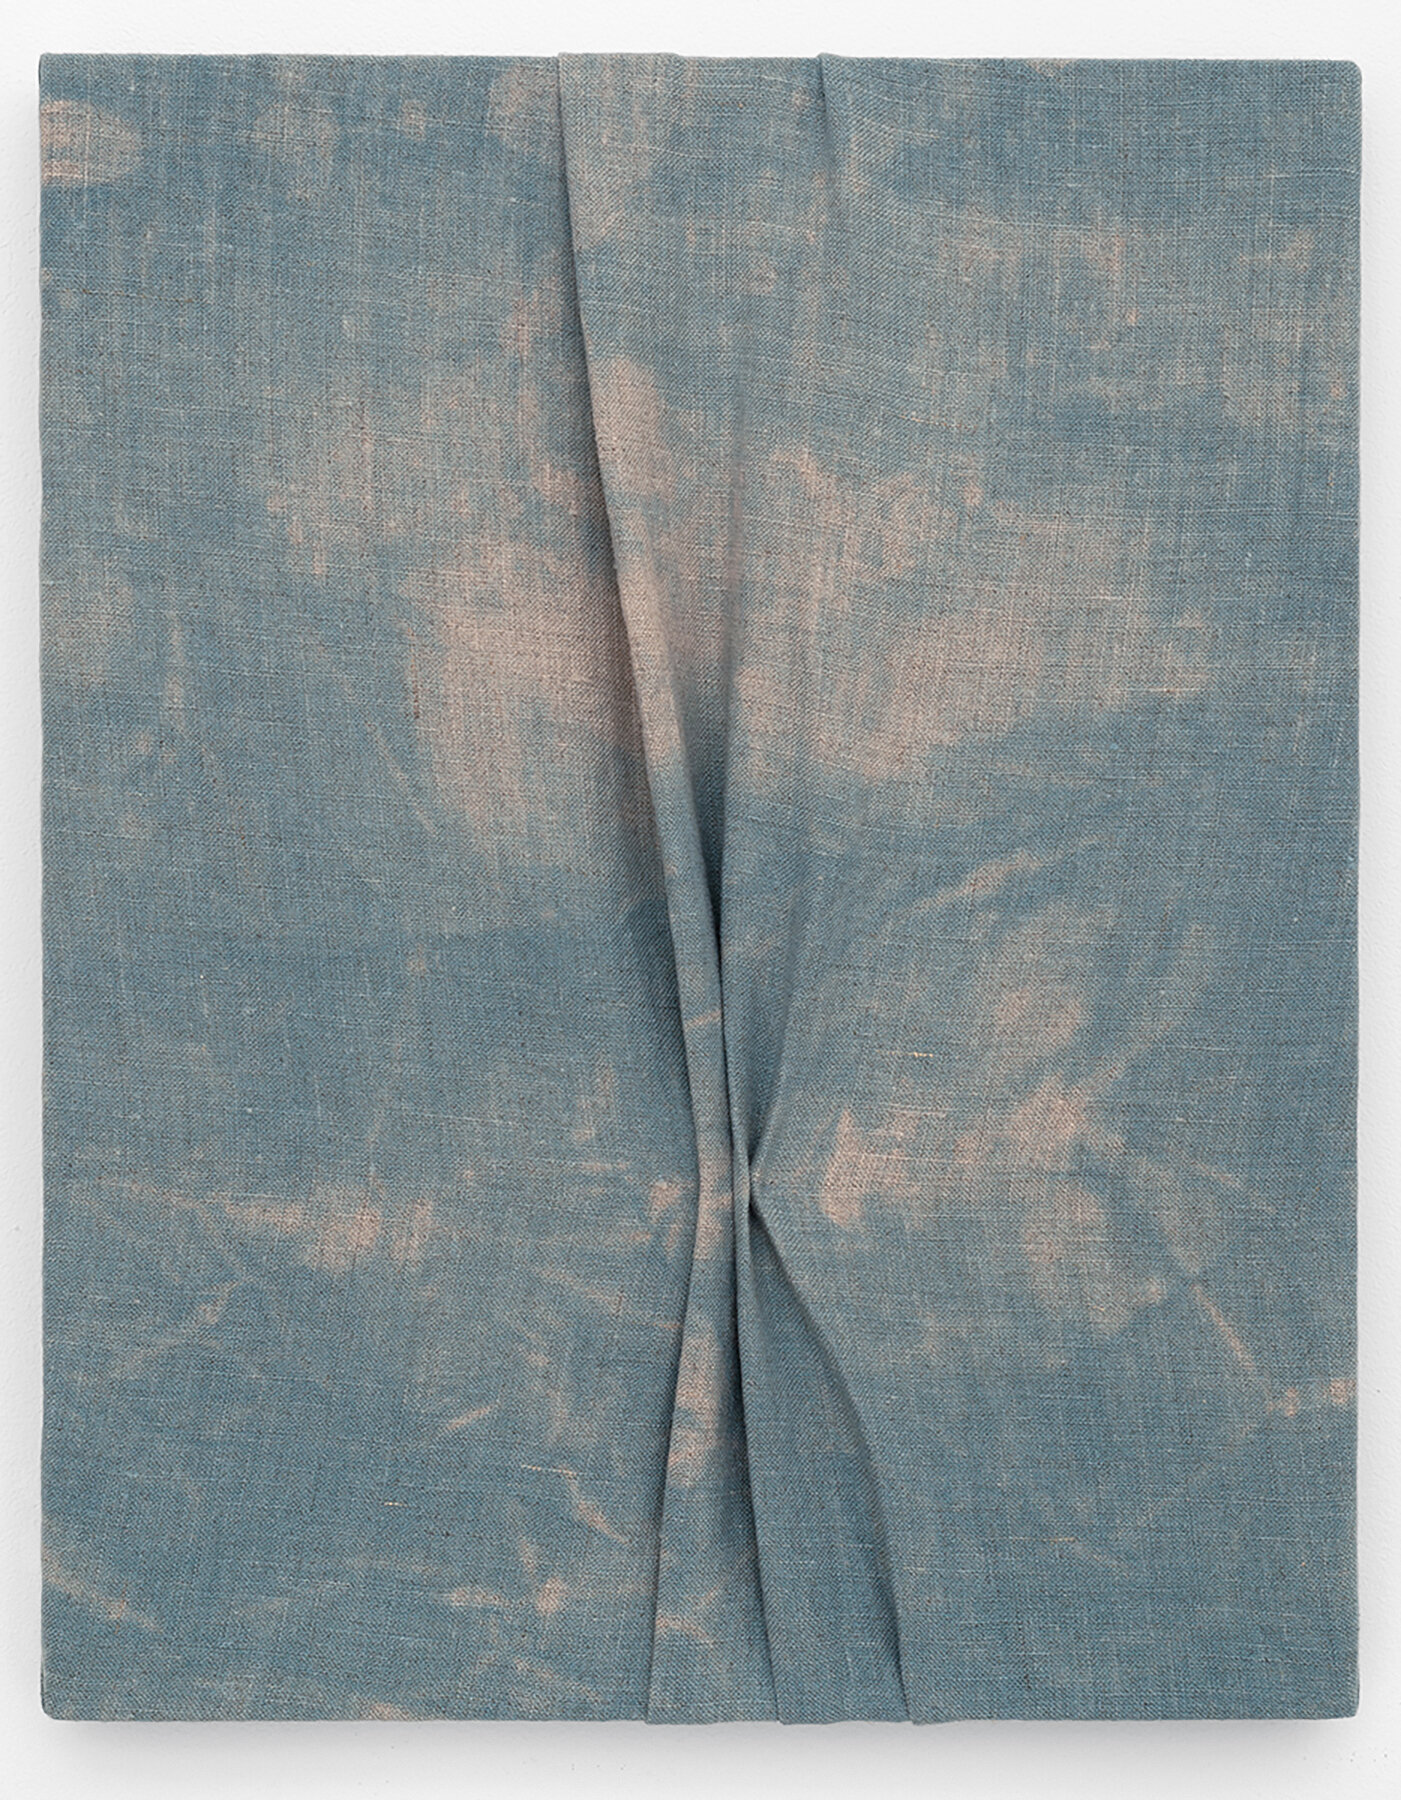   Pales the Sky , 2021                                                                                               Indigo dyed linen, stitched                                                                                               14 x 11 inc